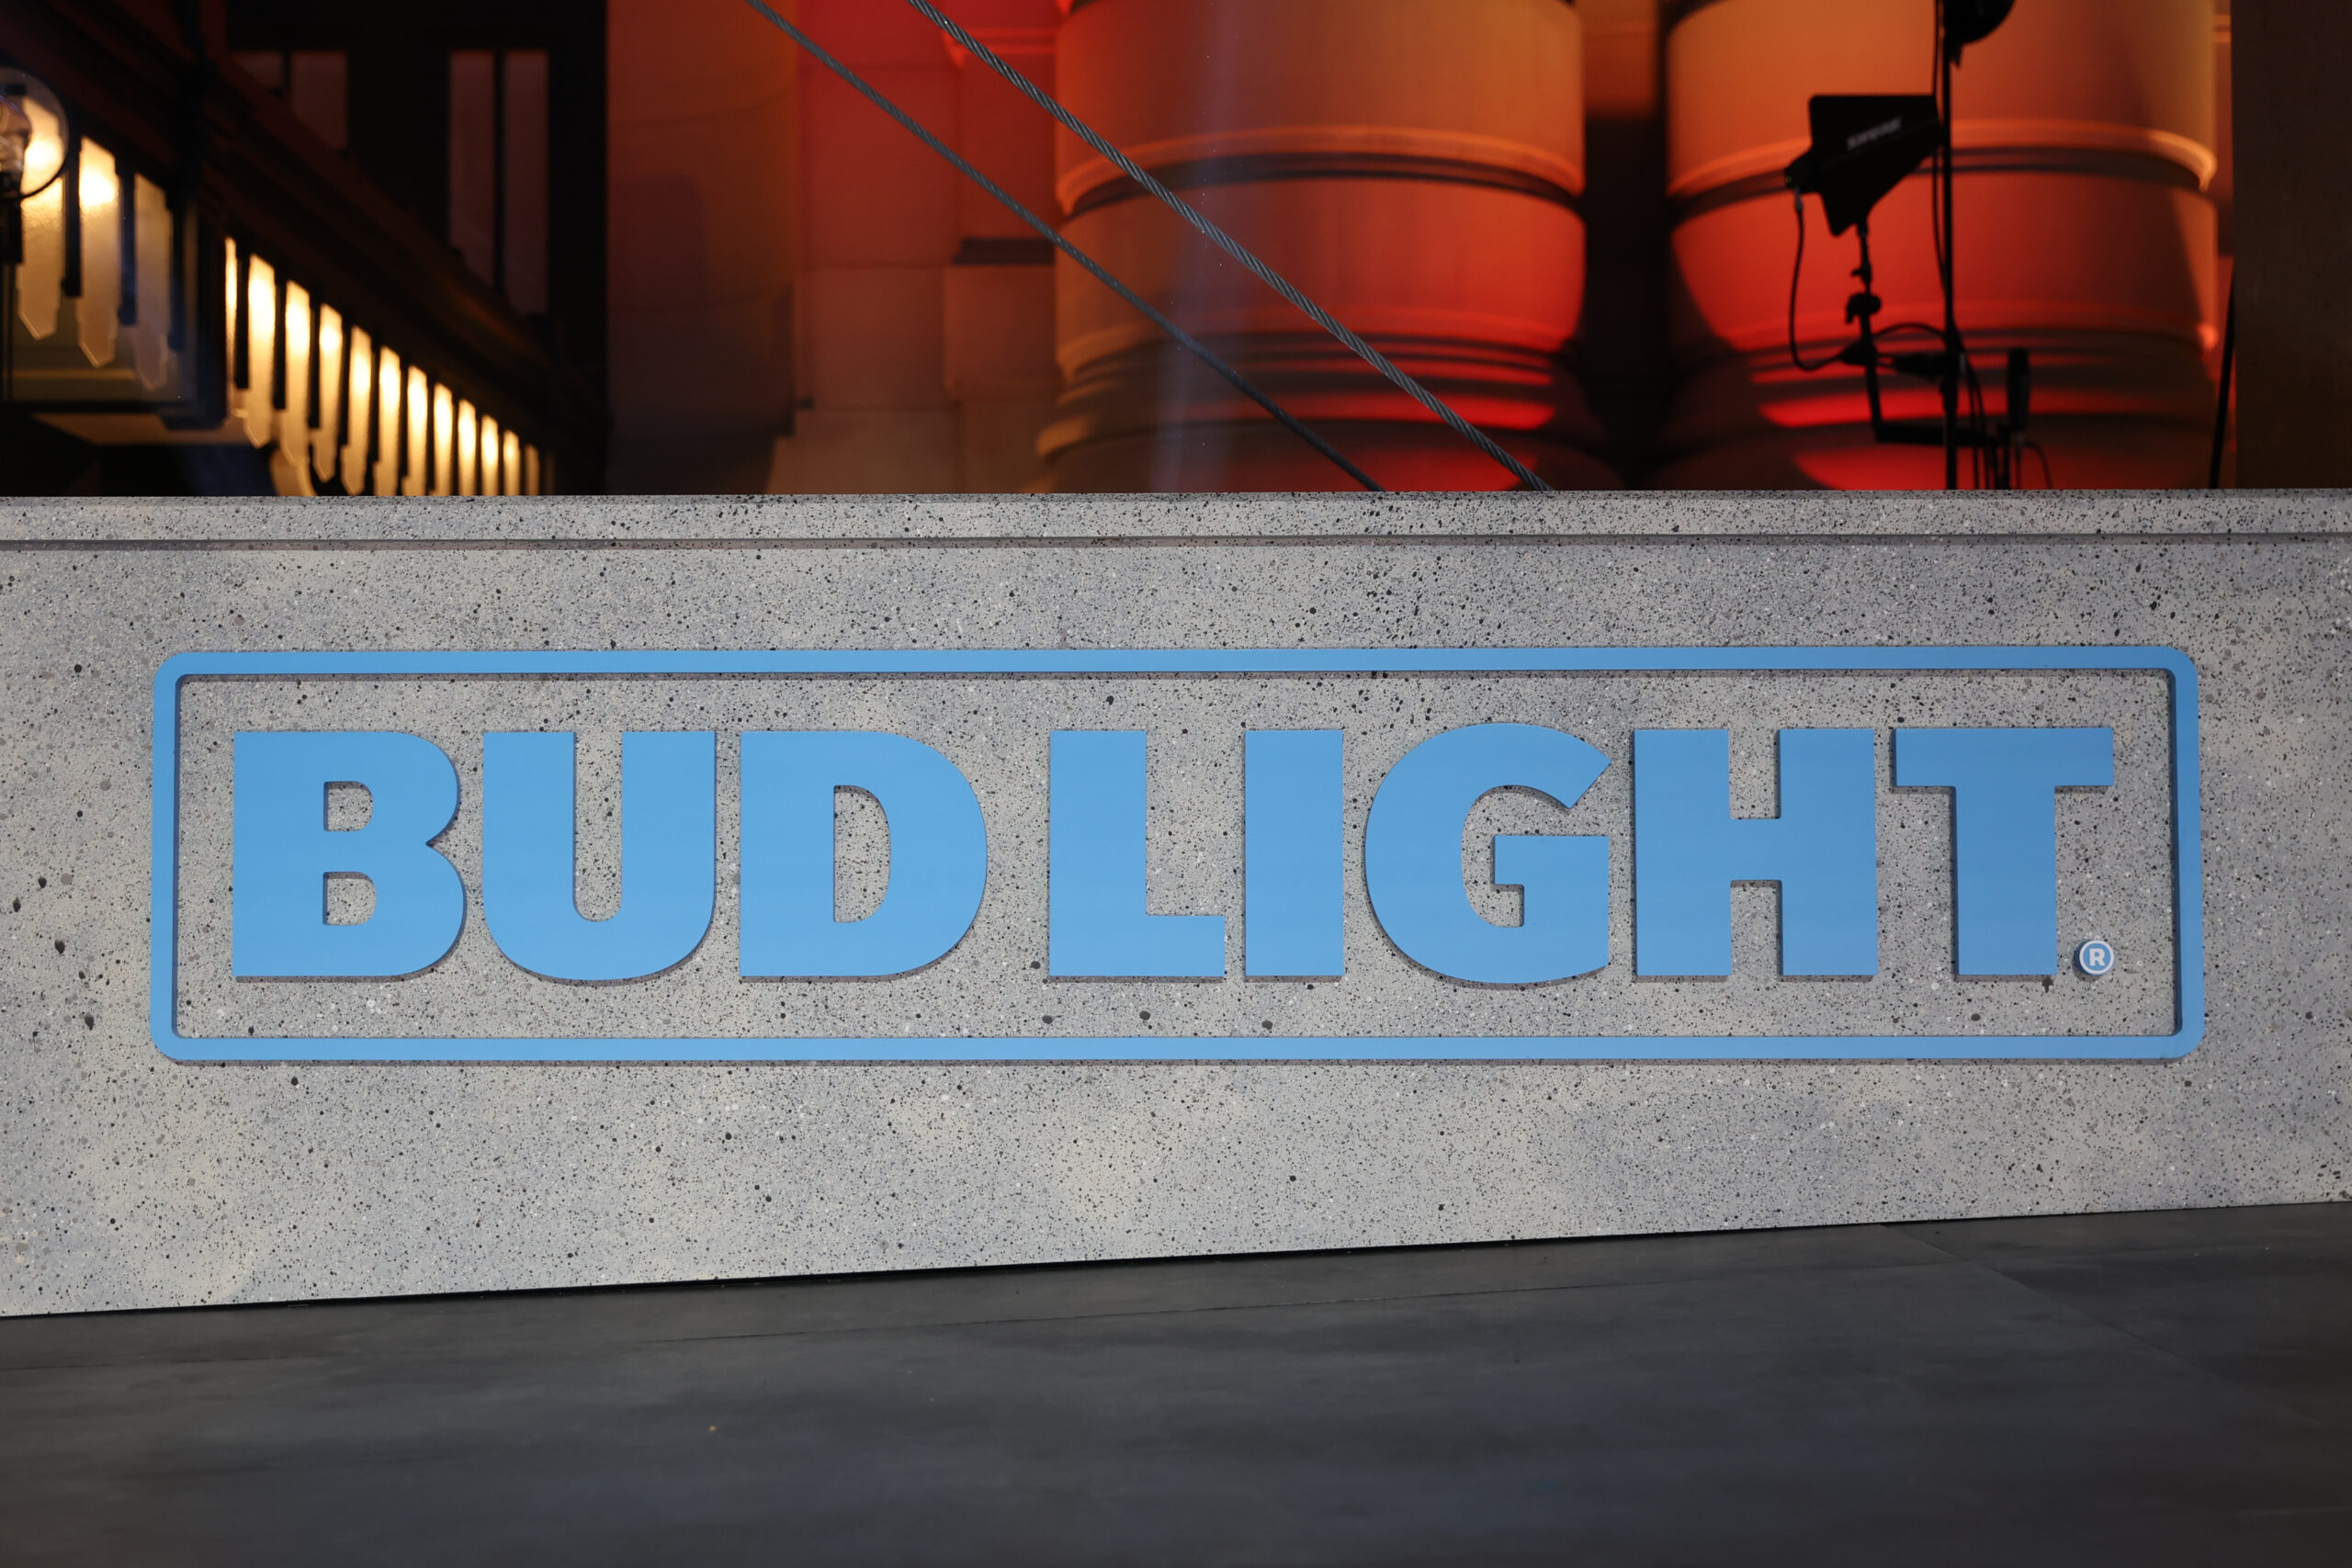 KANSAS CITY, MO - APRIL 28: A view of the Bud Light logo on the stage during the NFL Draft on April 28, 2023 at Union Station in Kansas City, MO. (Photo by Scott Winters/Icon Sportswire via Getty Images)